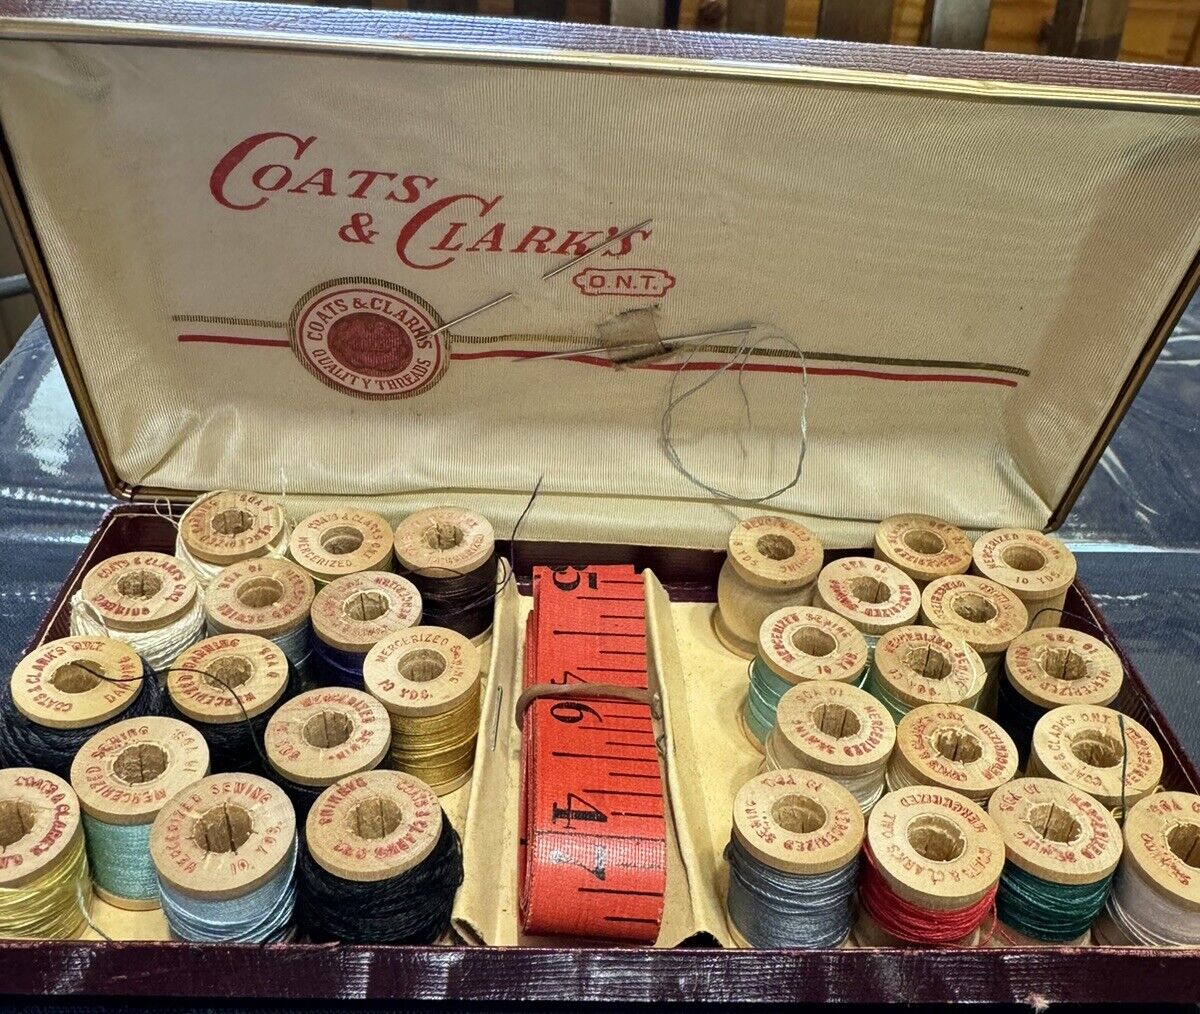 Vintage COATS & CLARK’S O.N.T. Sewing Case with Small Wood Spools, Misc.